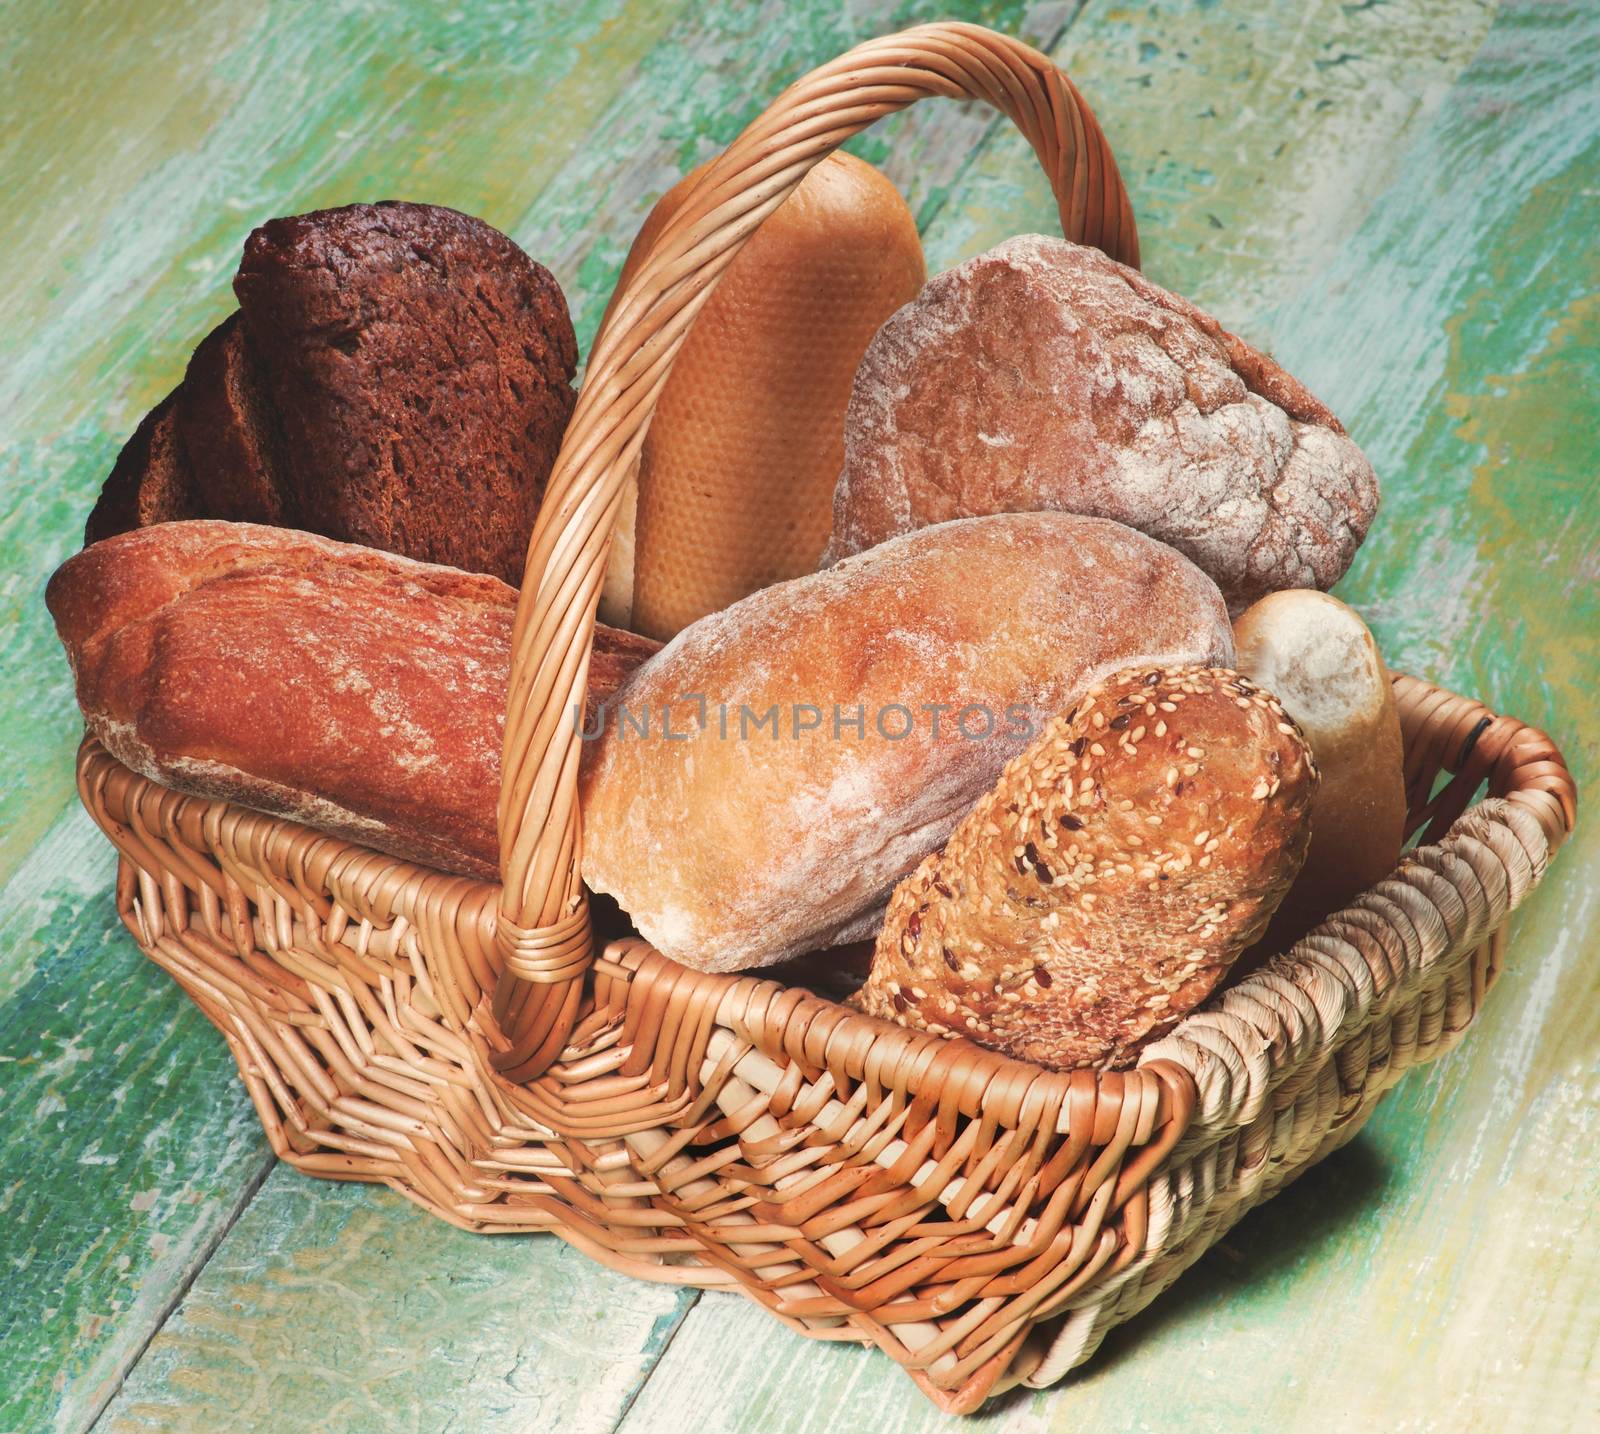 Various Buns, Baguette, Rye and Whole Wheat Bread in Wicker Basket closeup on Green Wooden background